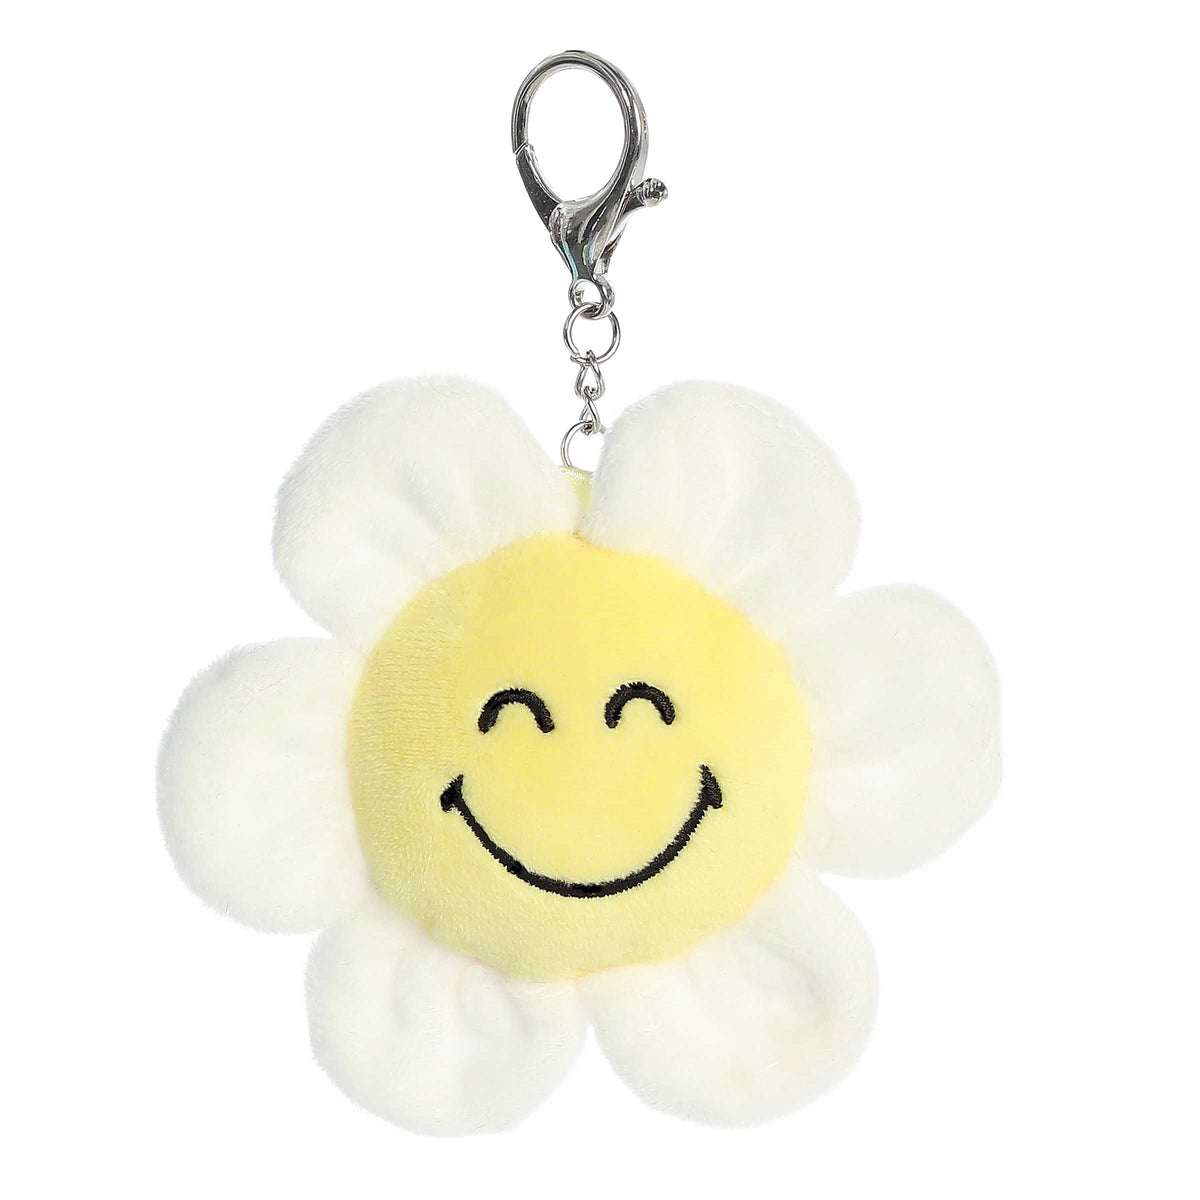 Daze Clip-On from SmileyWorld, combines a smiley face with a daisy, soft and durable